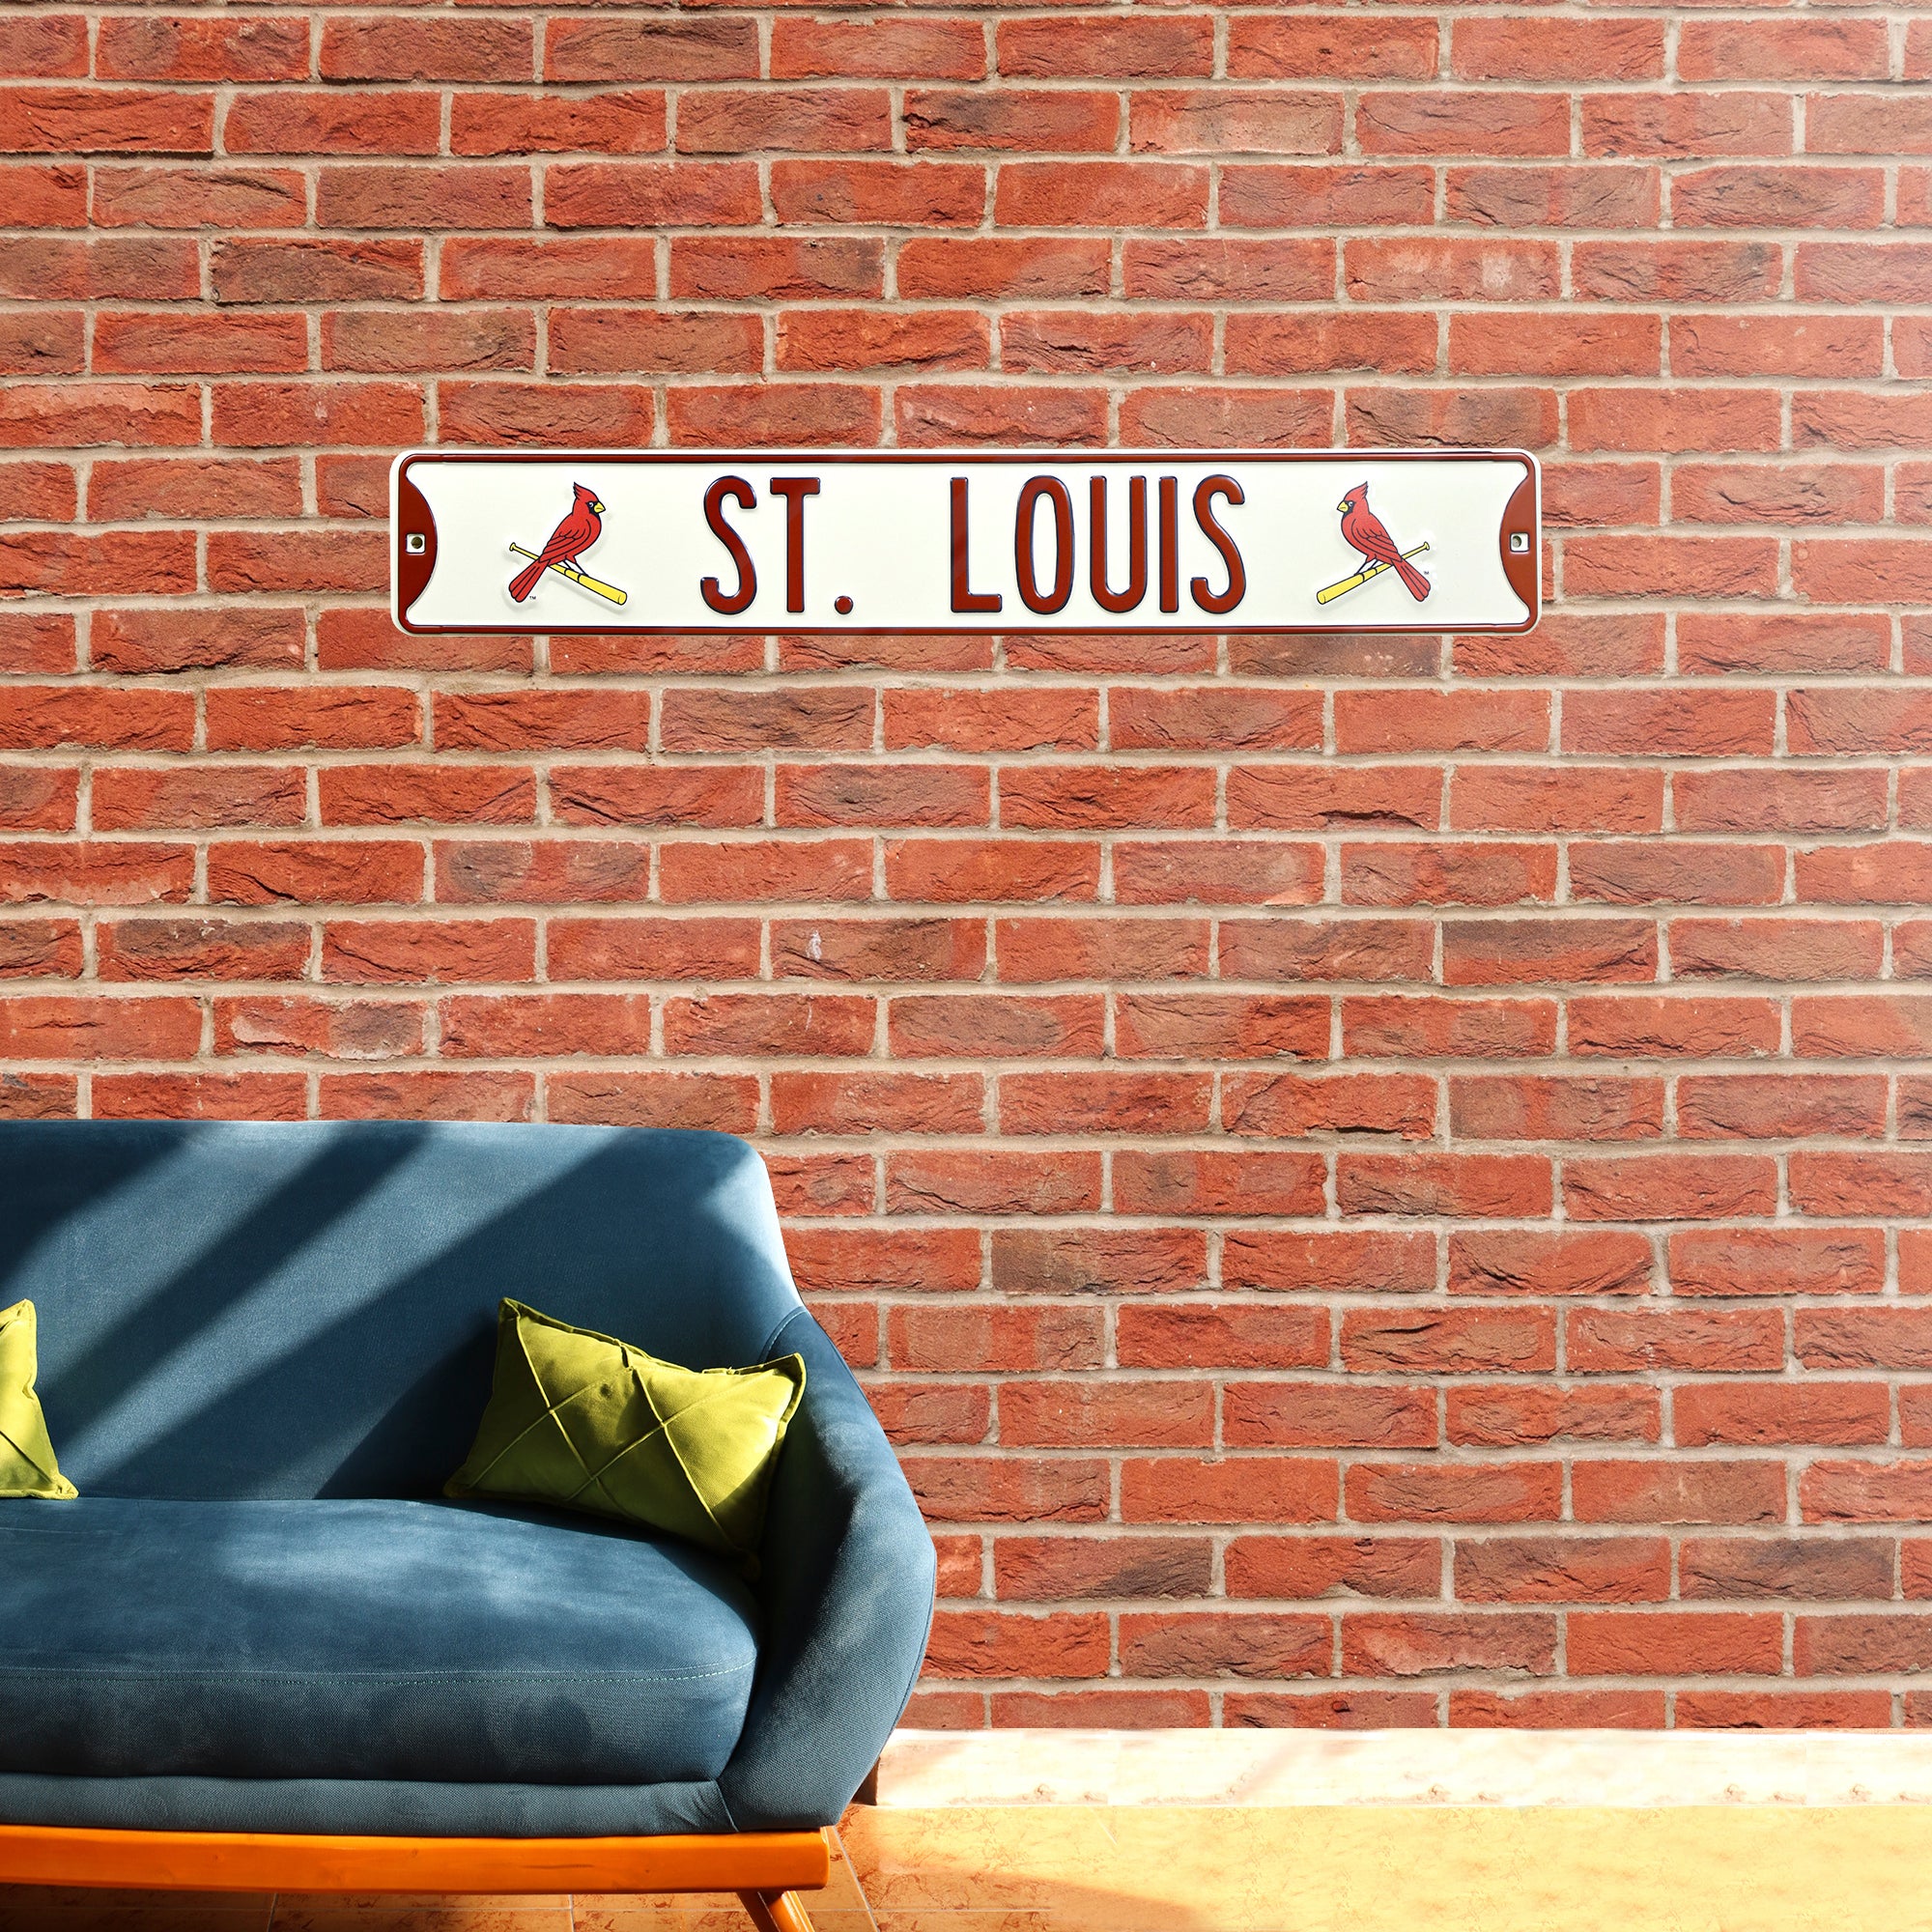 St Louis Cardinals Steel Street Sign with Logo-ST LOUIS ST LOUIS Ivory w/ 2 Logos 36" W x 6" H by Fathead